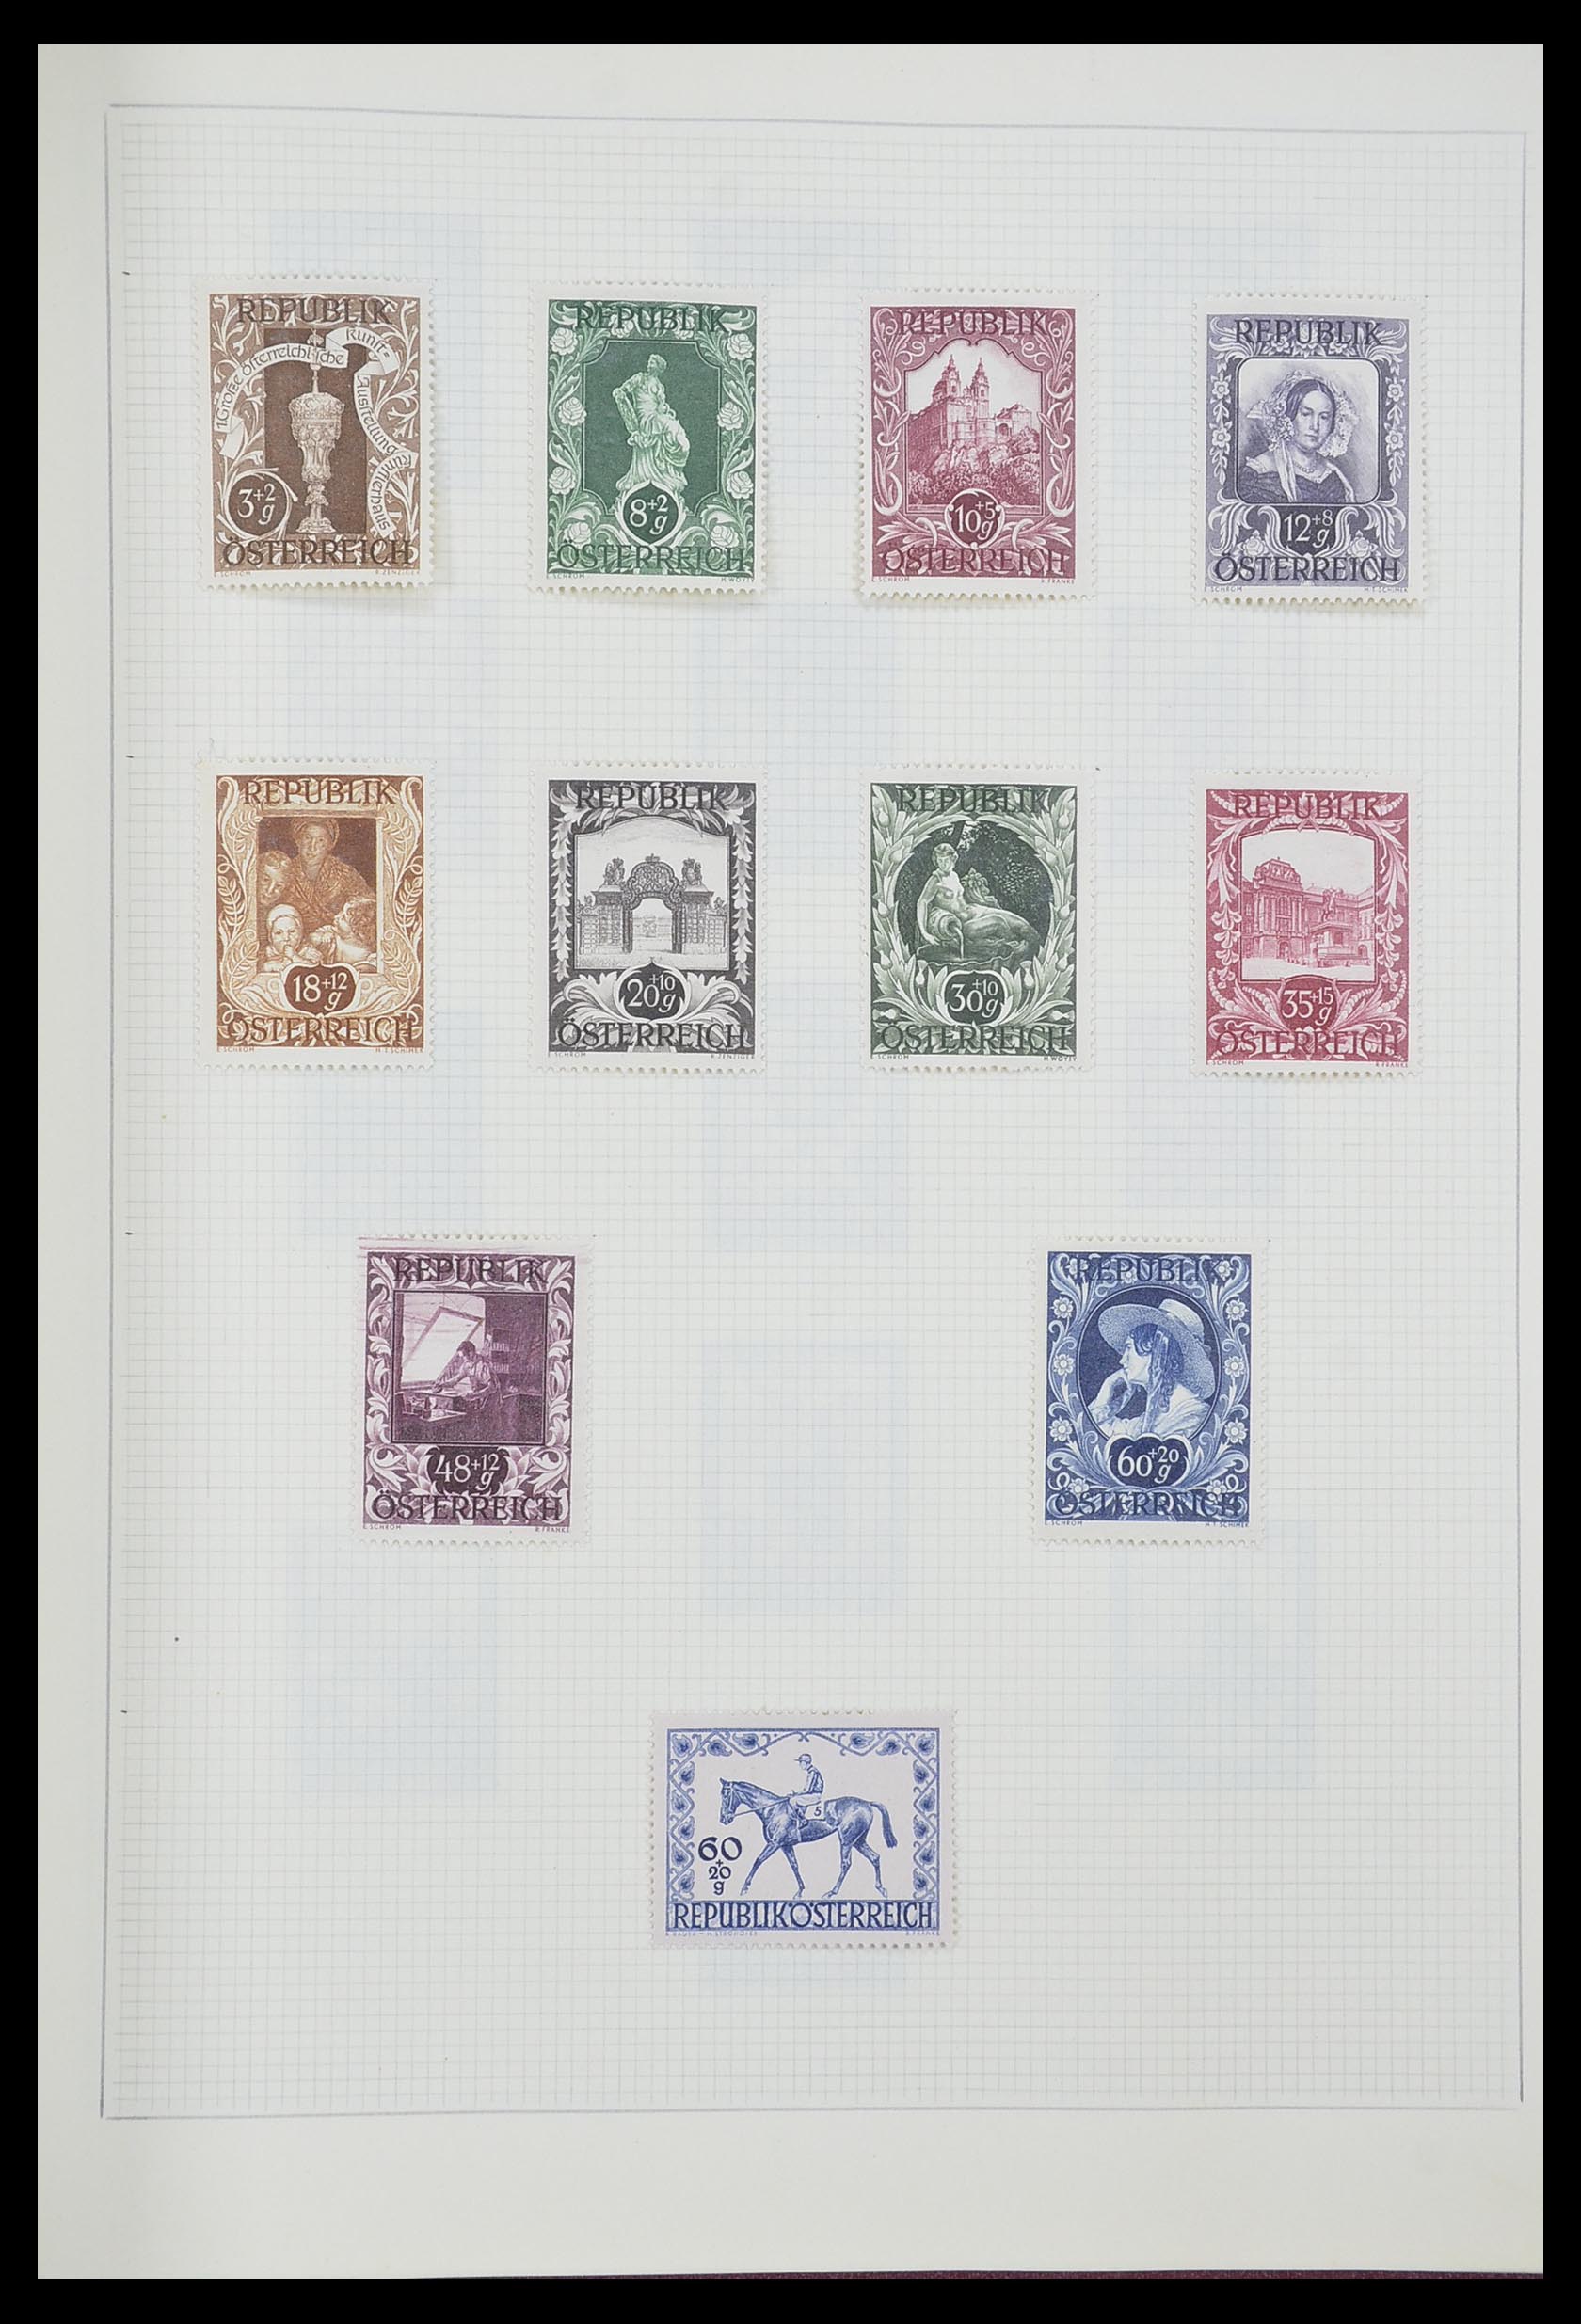 33406 186 - Stamp collection 33406 European countries 1938-1955.